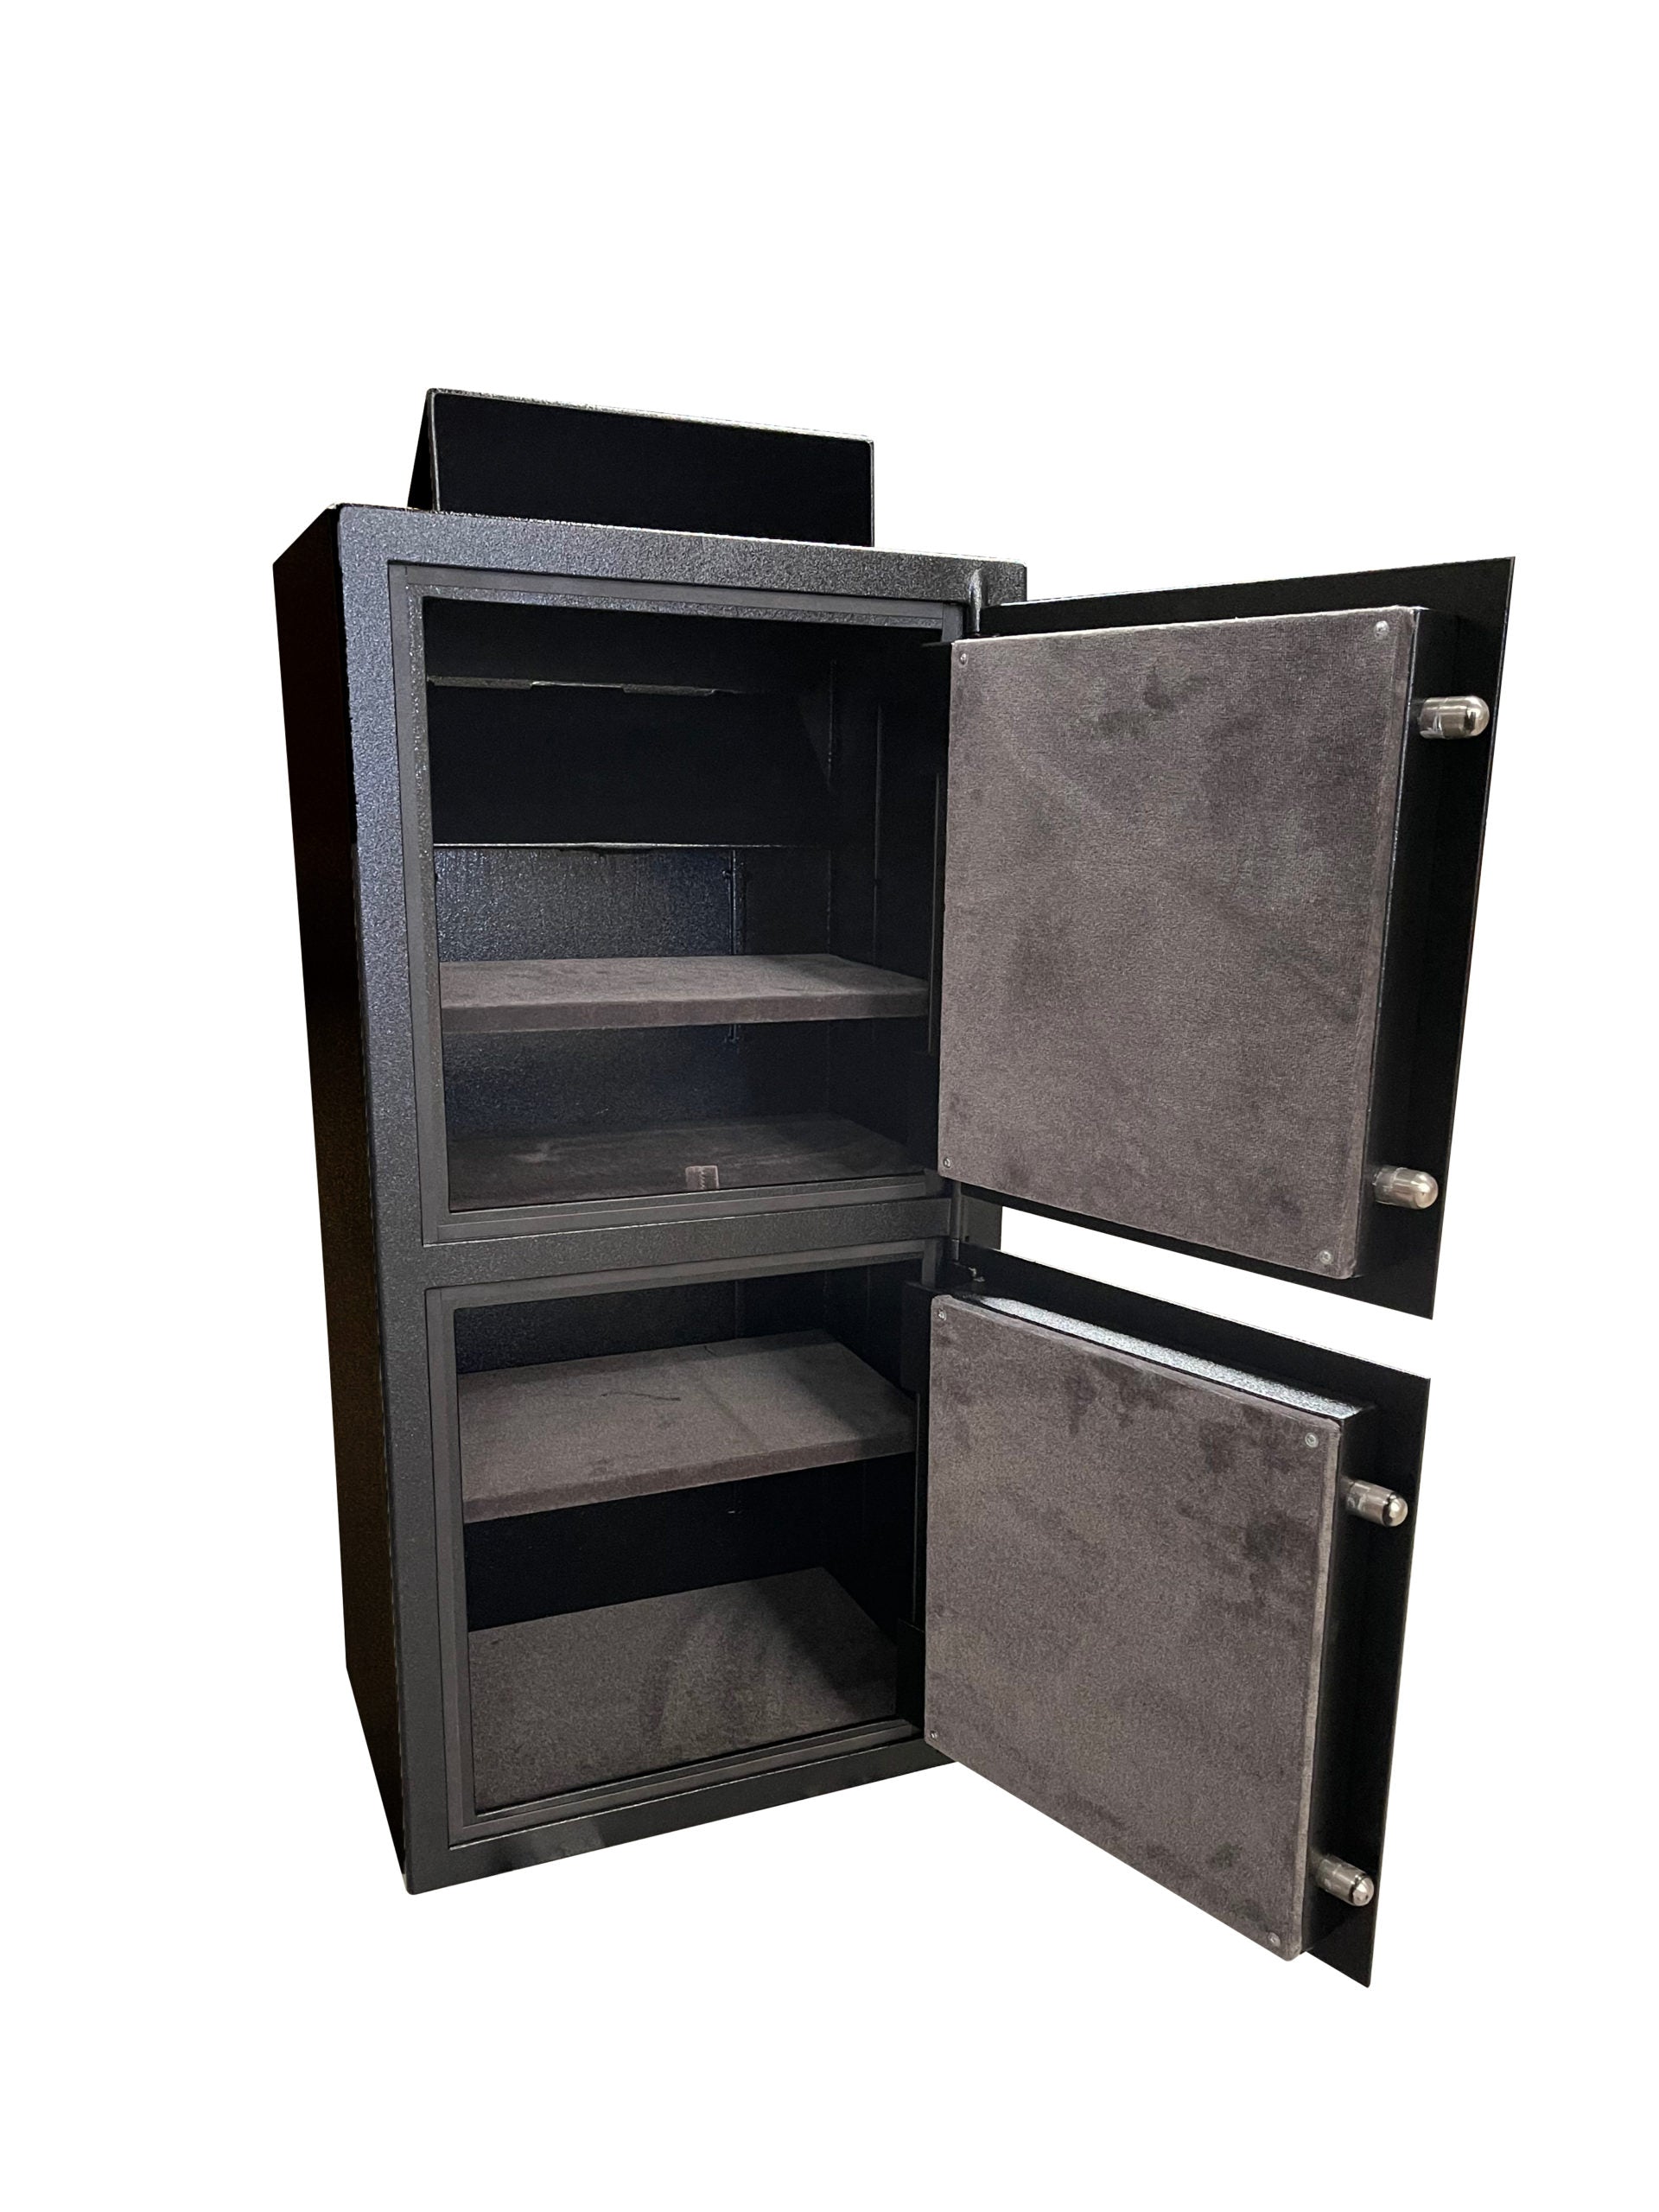 The Safe Gal 20x24x60 Cash Drop Depository Safe Pull Down Drawer Black